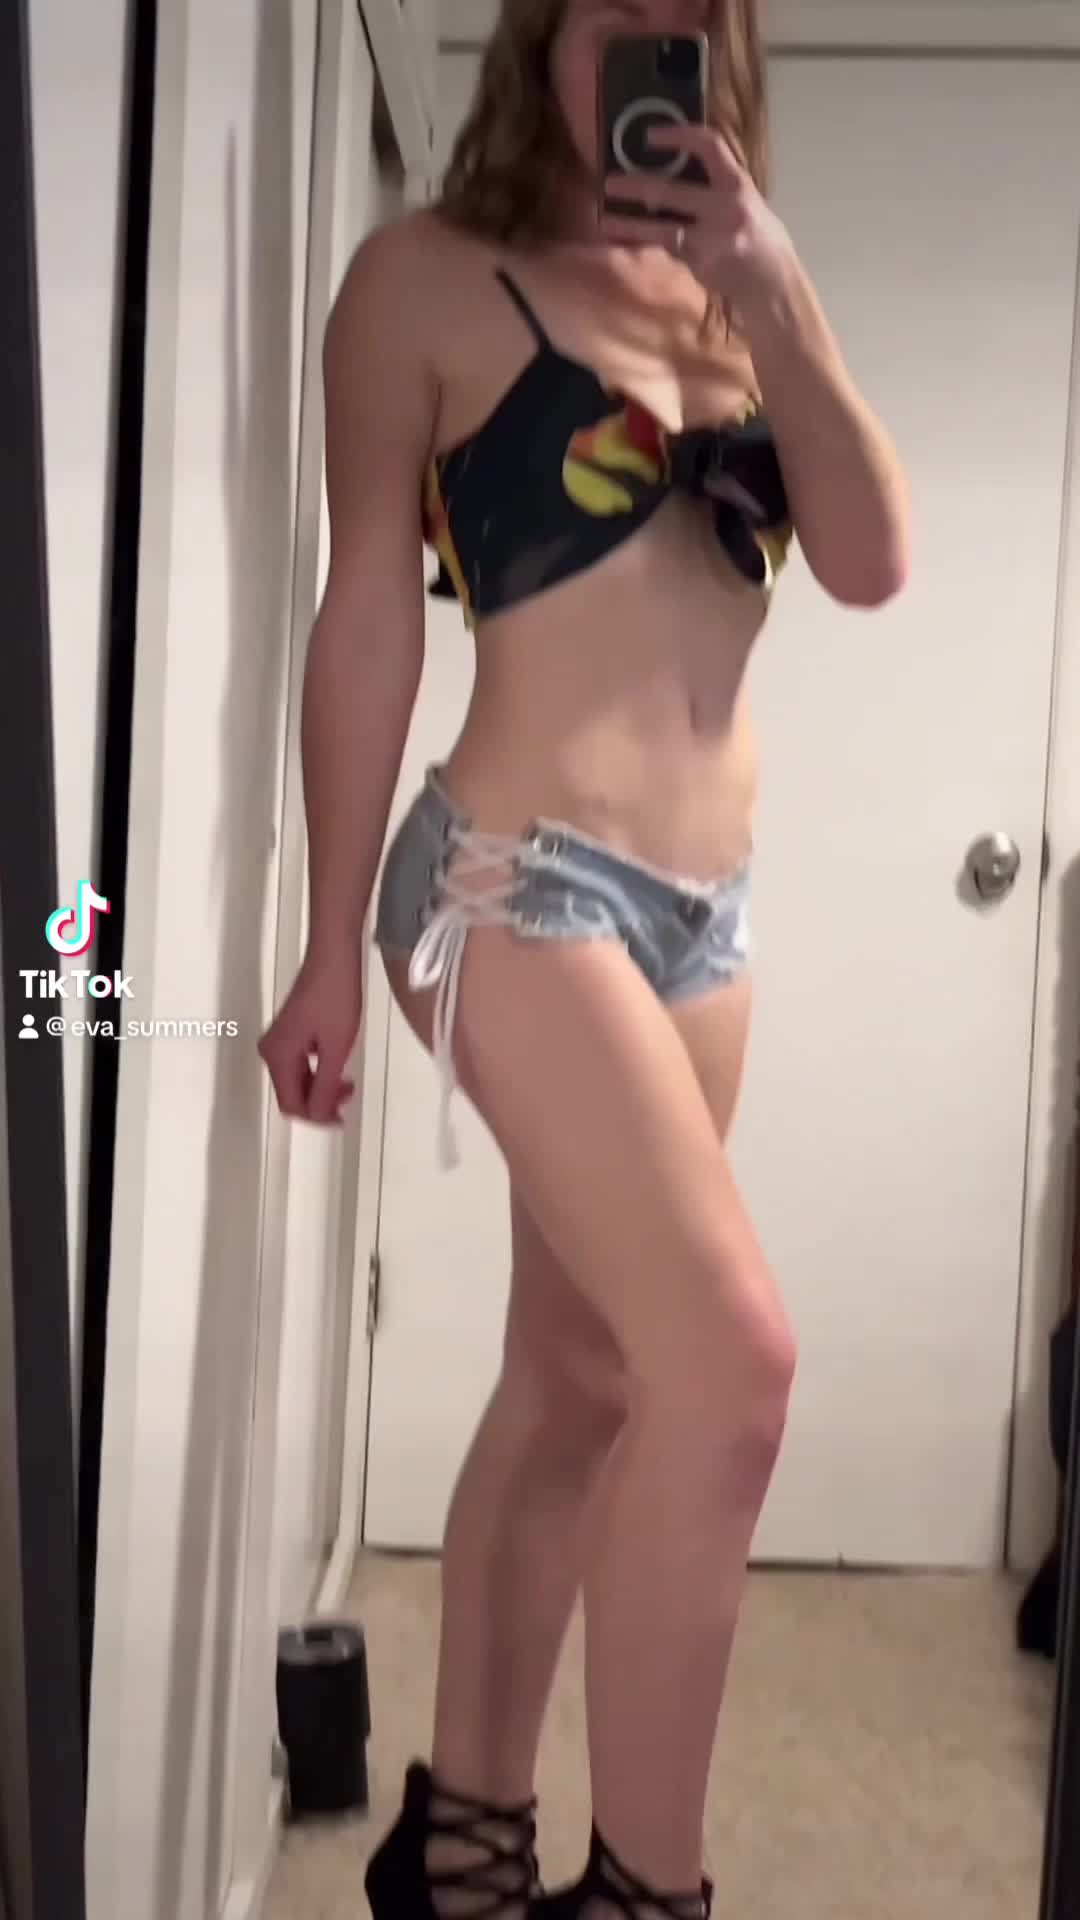 Watch the Video by Evasummers with the username @Evasummers, who is a star user, posted on March 11, 2024. The post is about the topic NSFW TikTok. and the text says '#girls #fyp #usa #tiktok #fashion #fashionstyle #fashionaddict #SHEINstyle #highheels #legs #thickthighs #foryou #foryoupage #viral #trending #blonde #petite #petitefashion #Midriff'